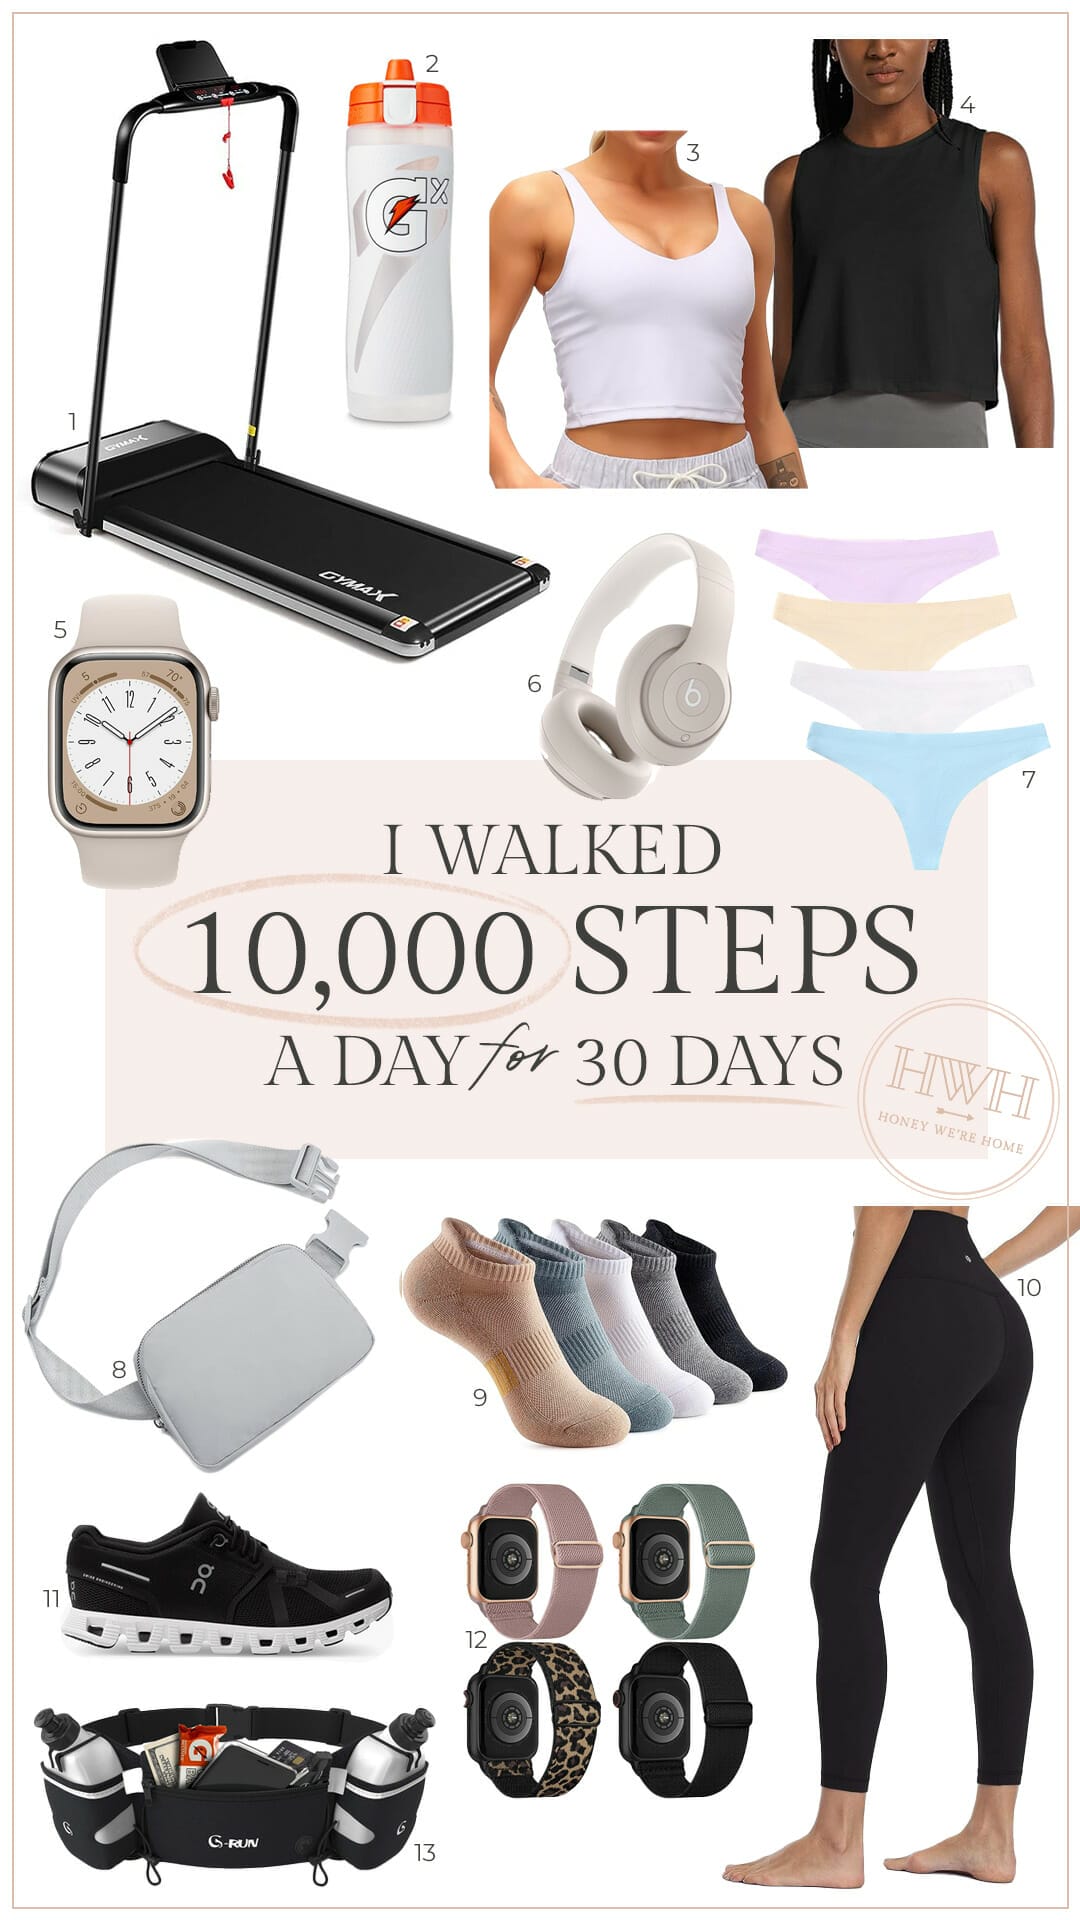 I walked 10,000 steps a day for 30 days 